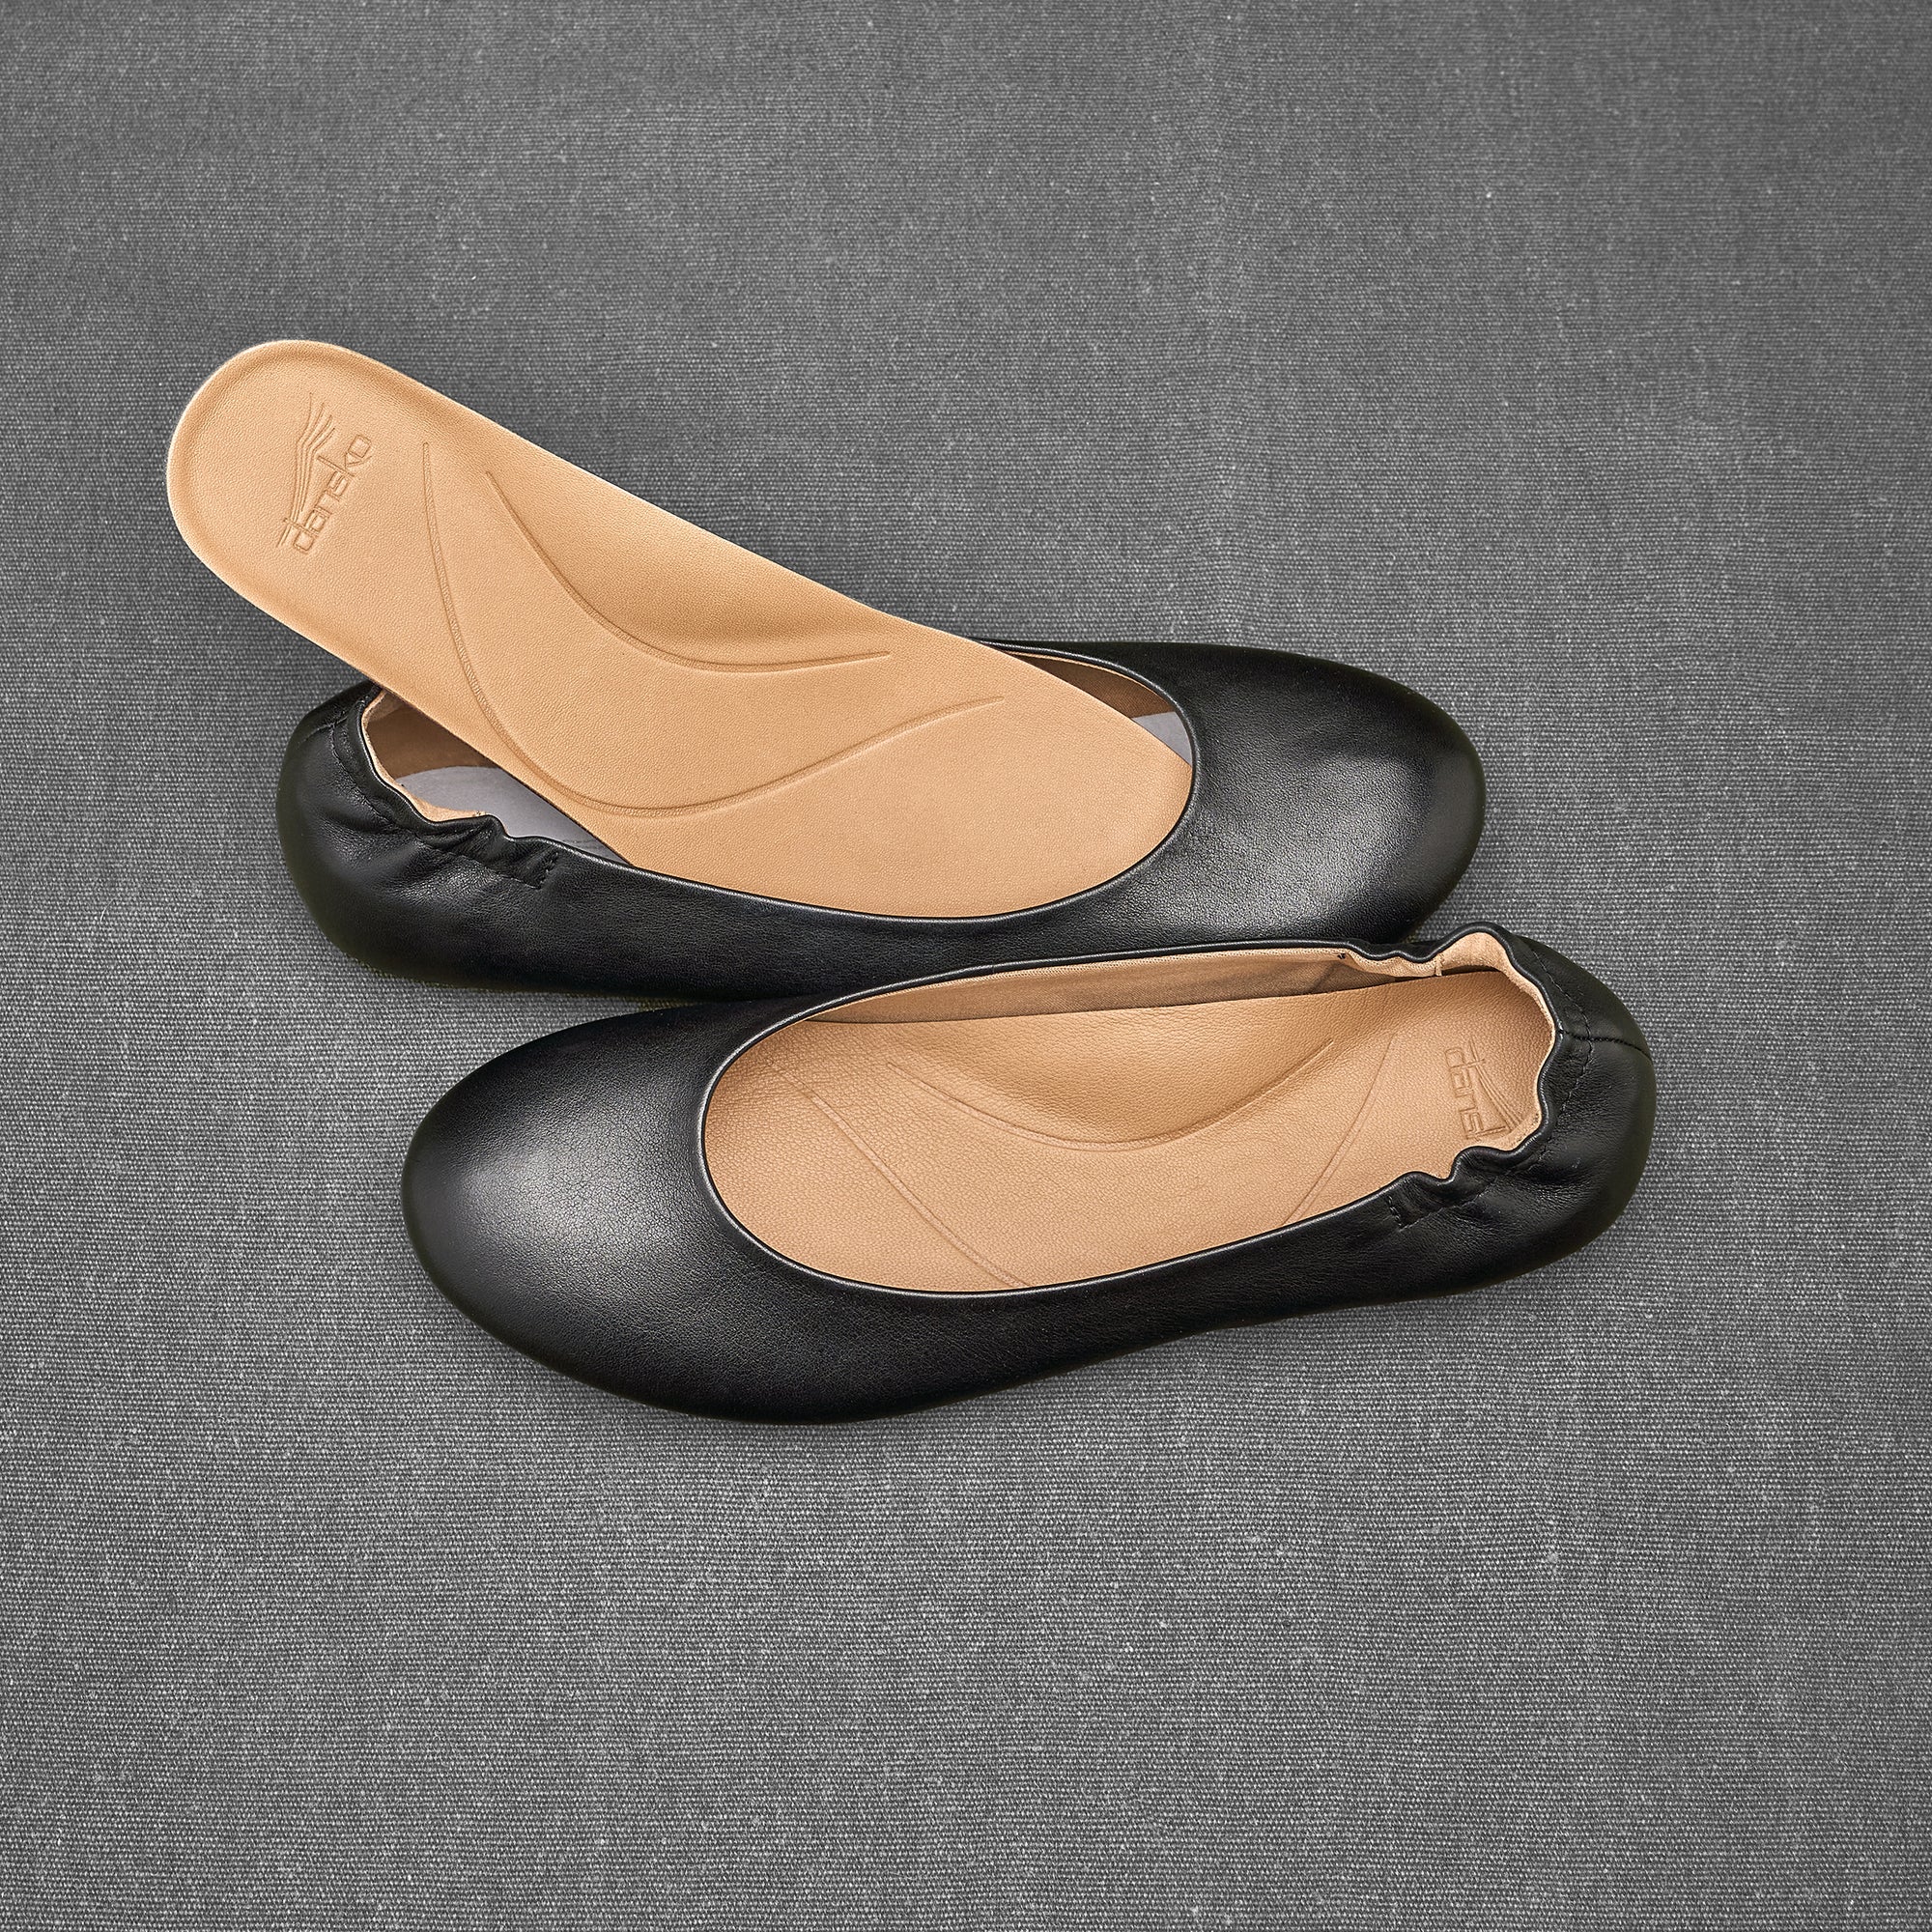 Black ballerina flats showing removable footbed and molded arch support.